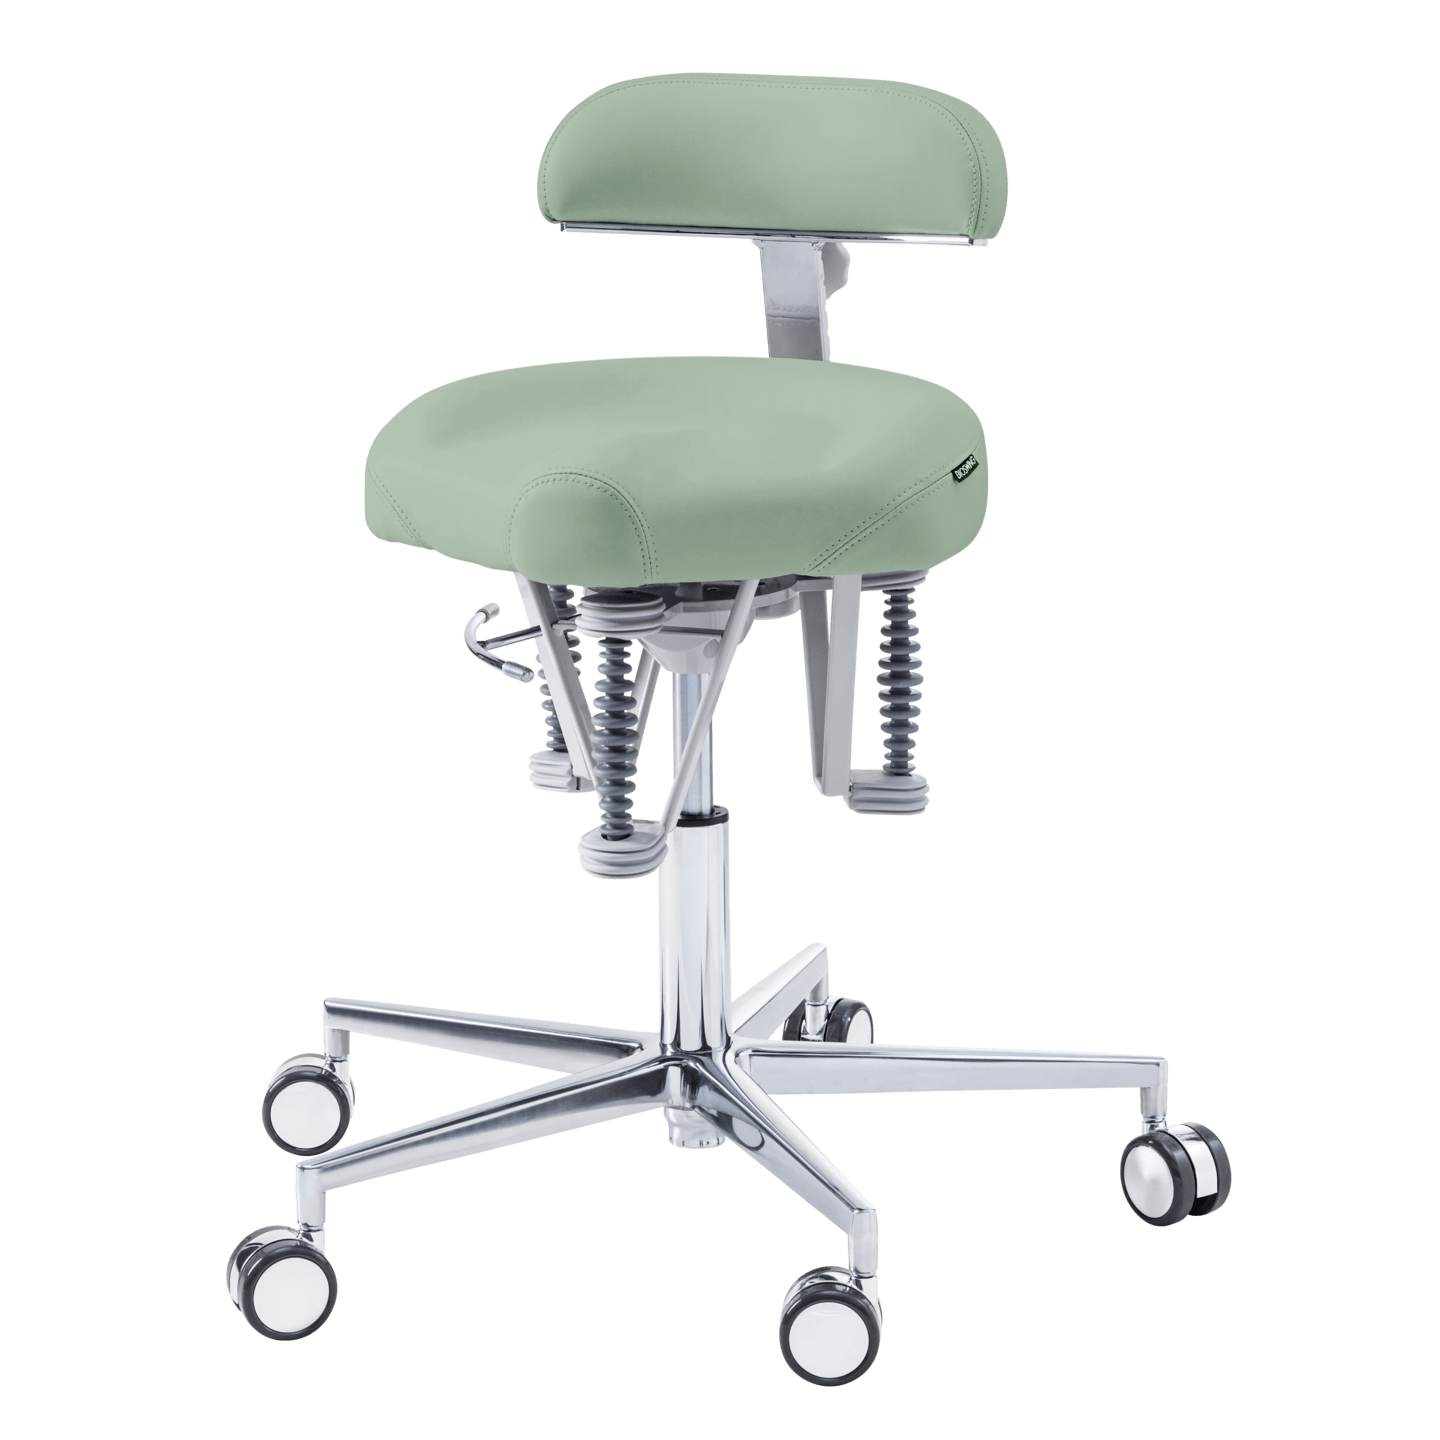 Bioswing - Work chair boogie in sage